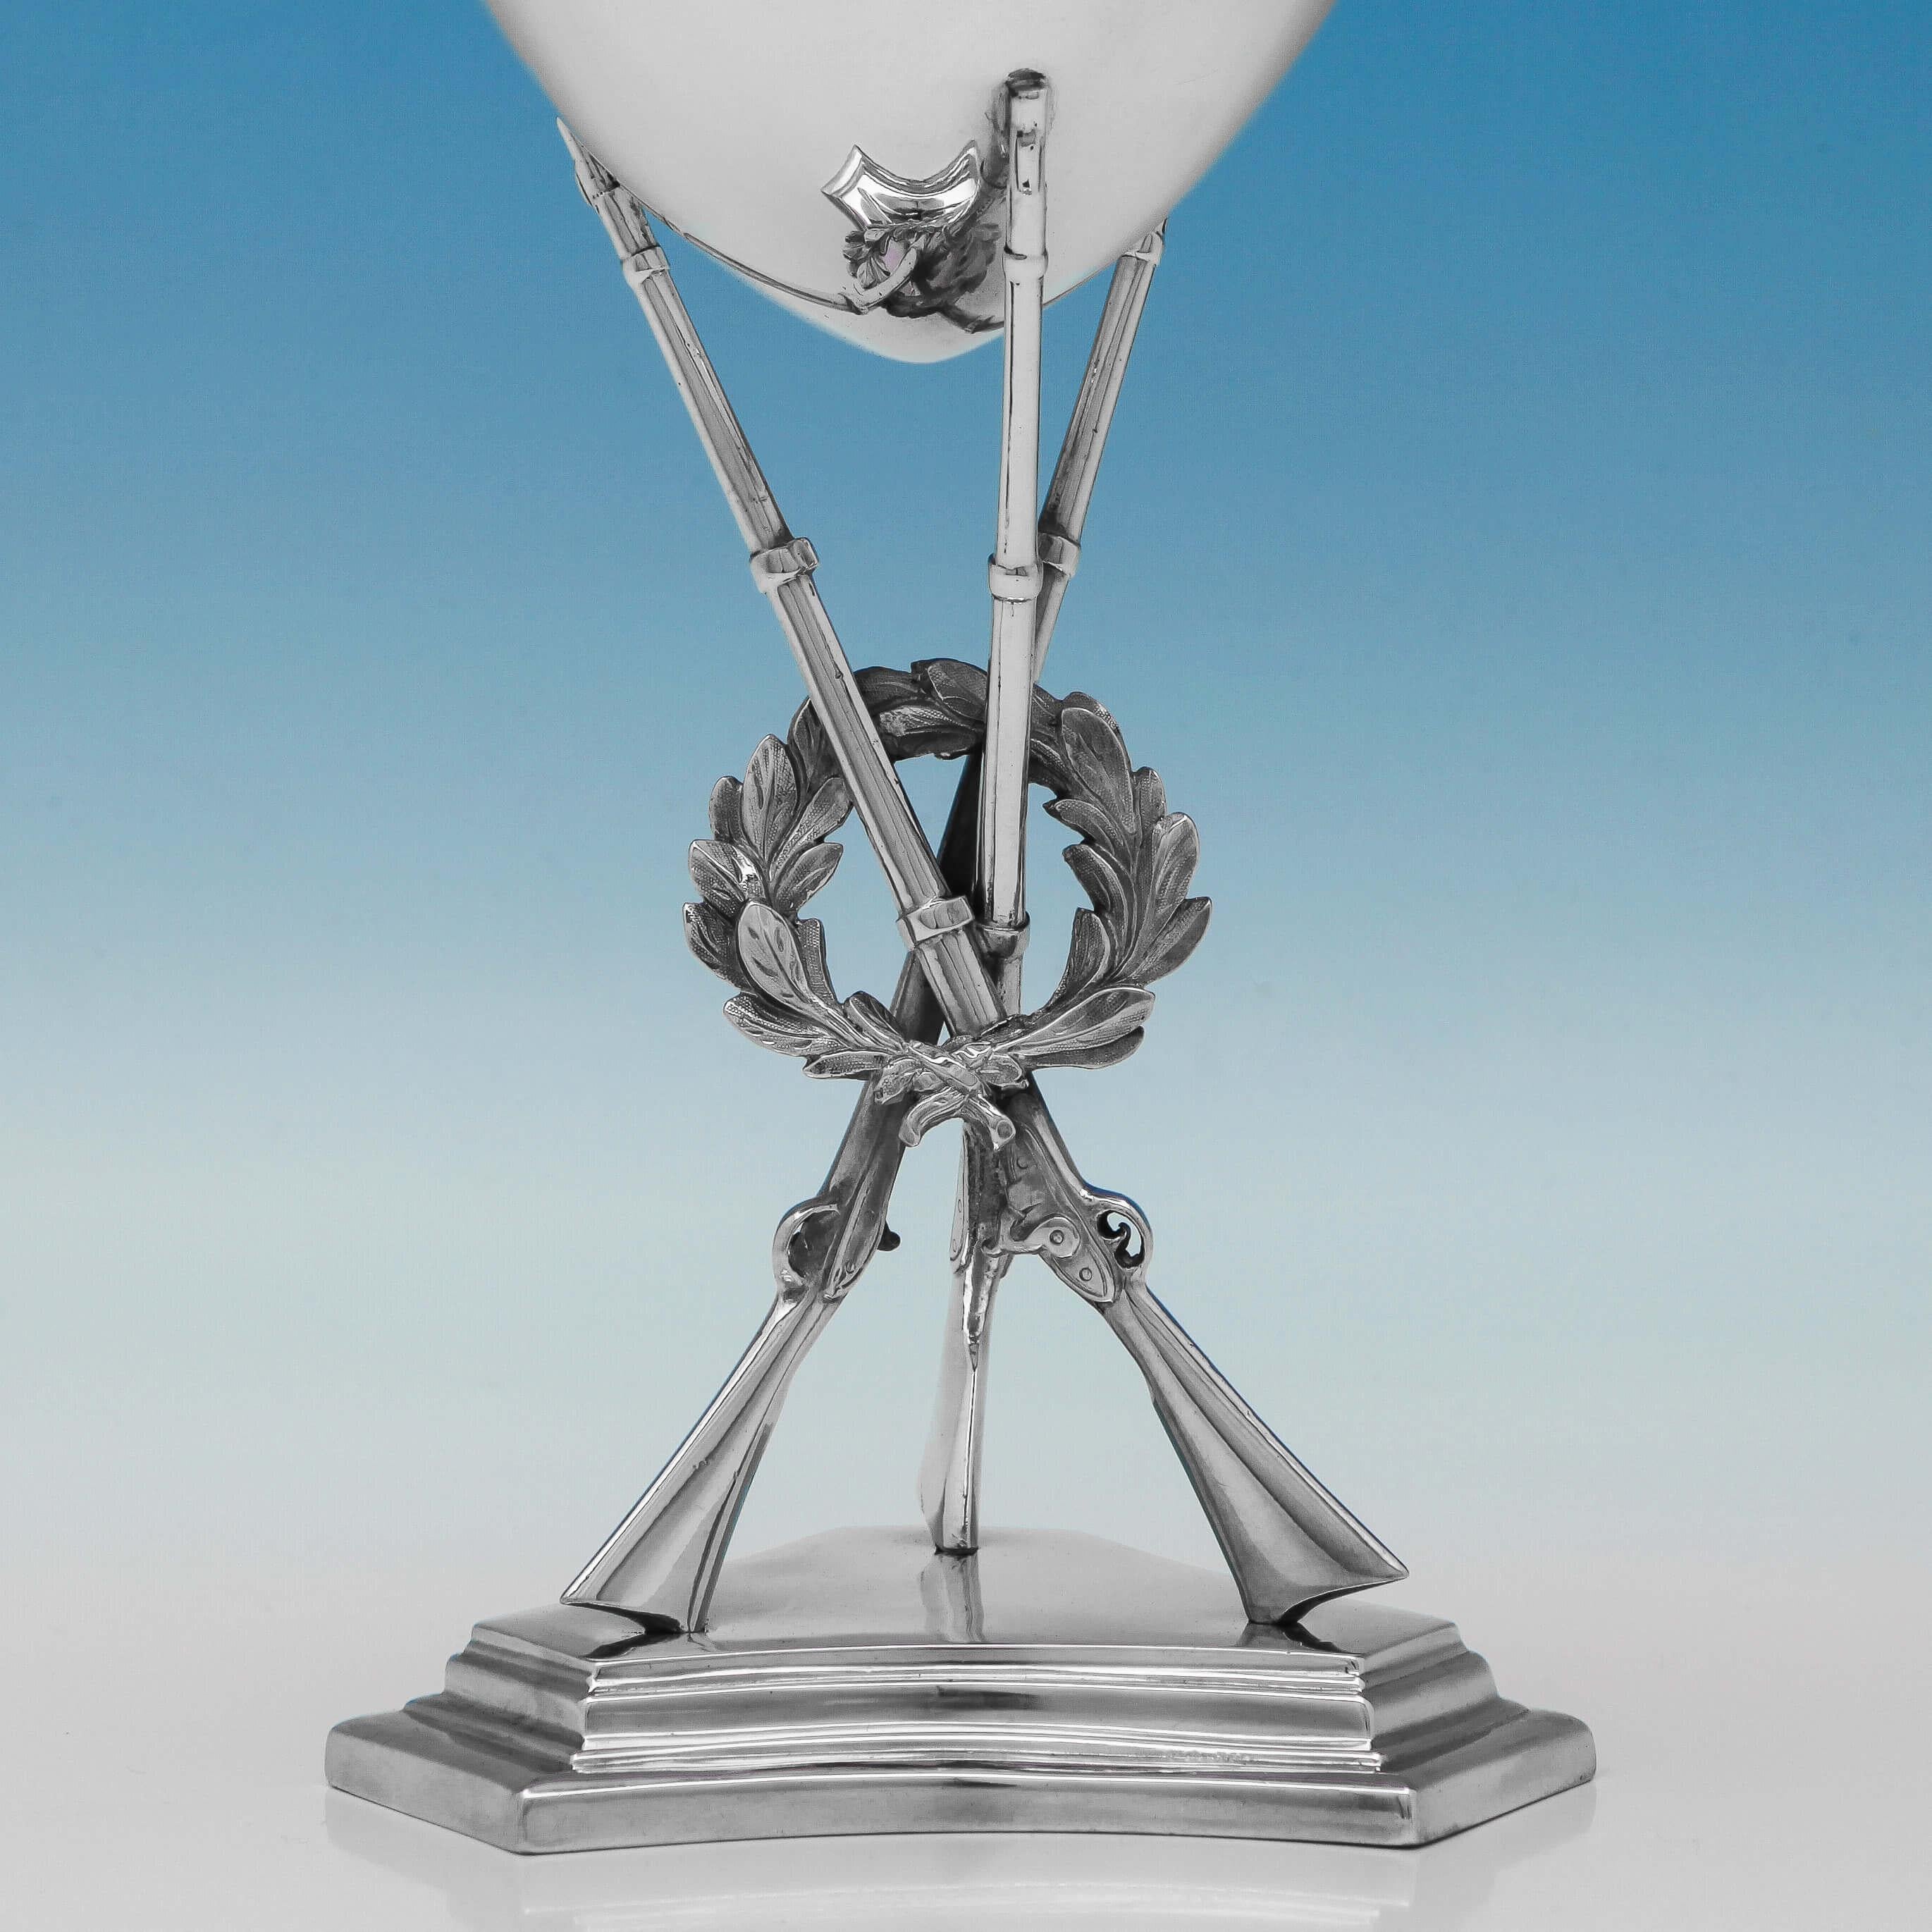 Hallmarked in London in 1863 by George Angell, this fine antique, Victorian, sterling silver goblet would make an ideal presentation piece. It stands on a stepped pedestal base, with three rifles and a wreath forming the stem. It measures 9